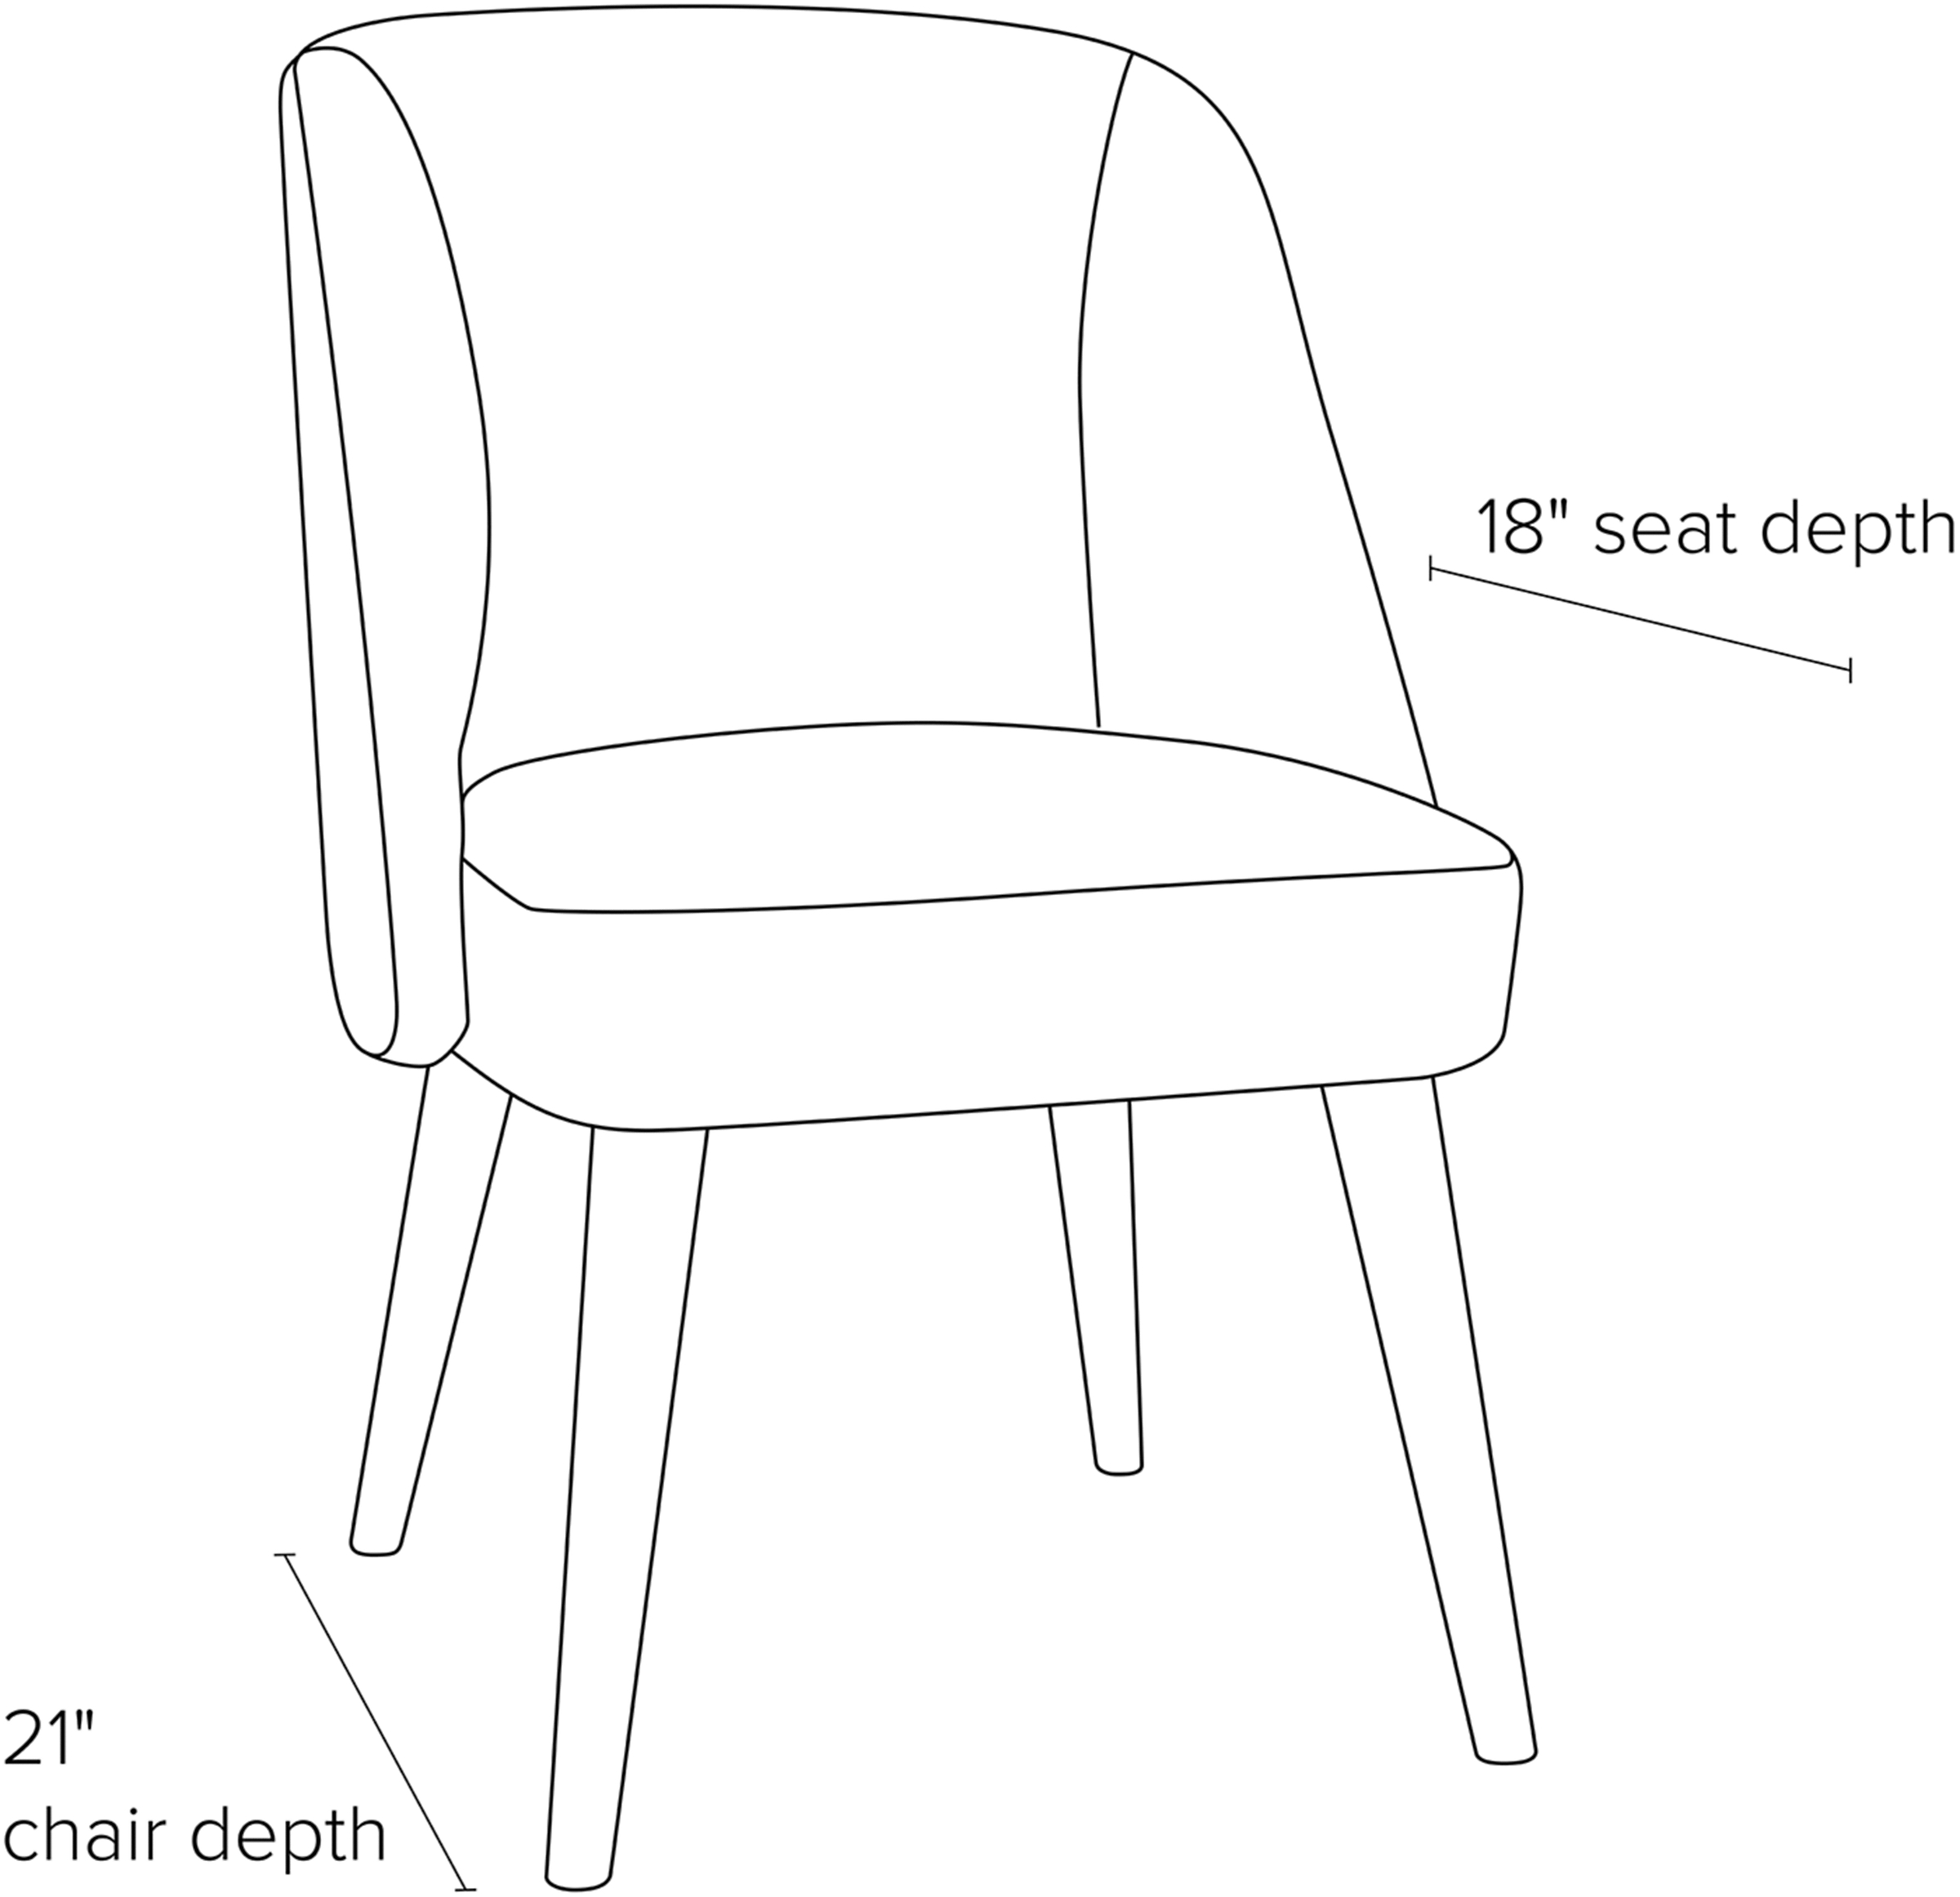 Side view dimension illustration of Cora dining chair.